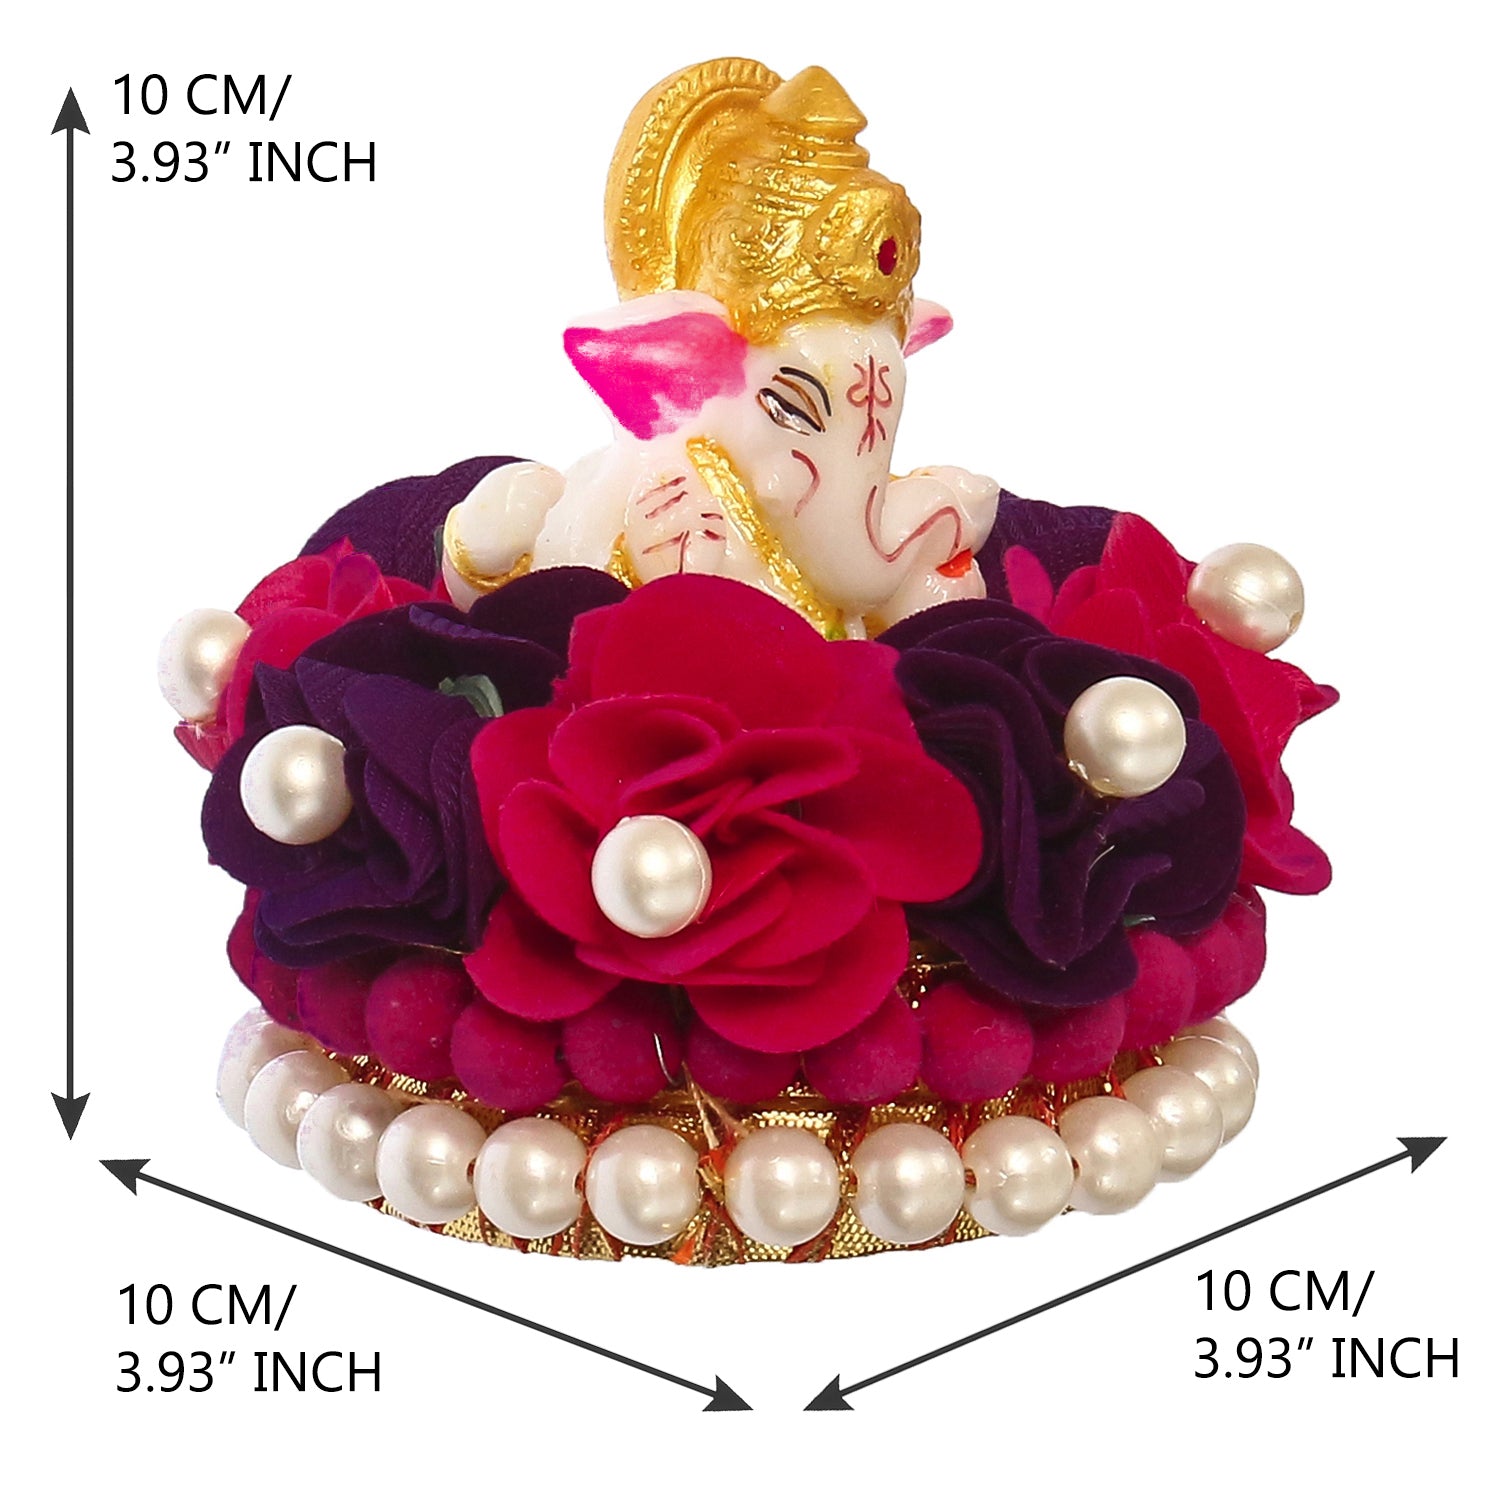 Lord Ganesha Idol On Decorative Handcrafted Red And Purple Flowers Plate 3